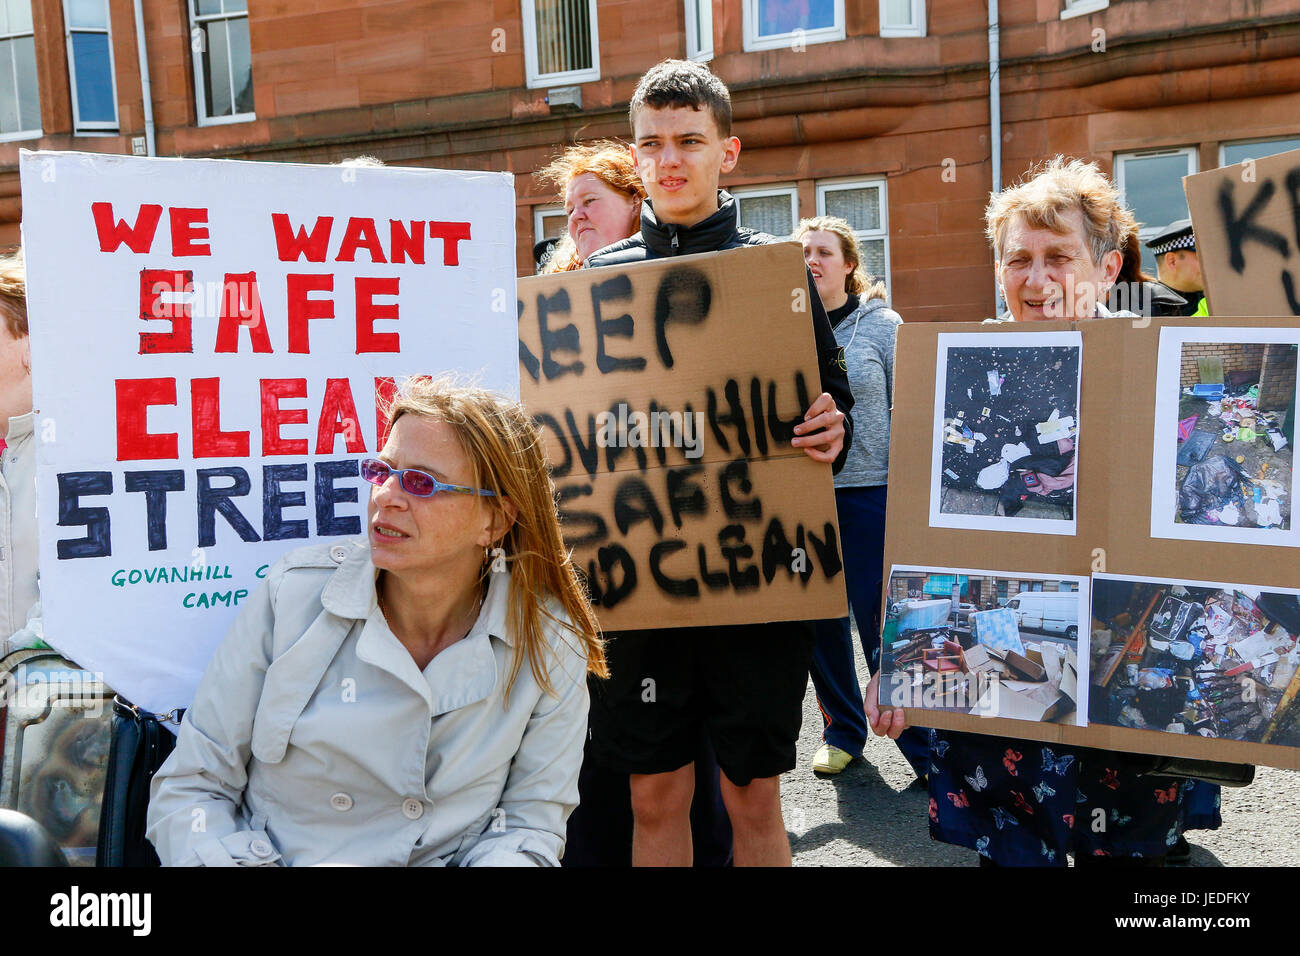 Glasgow, UK. 24th June, 2017. LIZ CROSBIE and FRANCES STOJILKOVIC from Govanhill Community Campaign lead a protest march of several hundred local residents through Govanhill, Glasgow to NICOLA STURGEON's (MSP and Scotland's First Minister) constituency office to hand in a petition demanding action be taken to make the streets safer and cleaner. This was the latest action in a long standing campaign trying to involve and get action from NICOLA STURGEON, who was unavailable and the petition was received by MHAIRI HUNTER, an SNP local counsellor on her behalf. Credit: Findlay/Alamy Live News Stock Photo